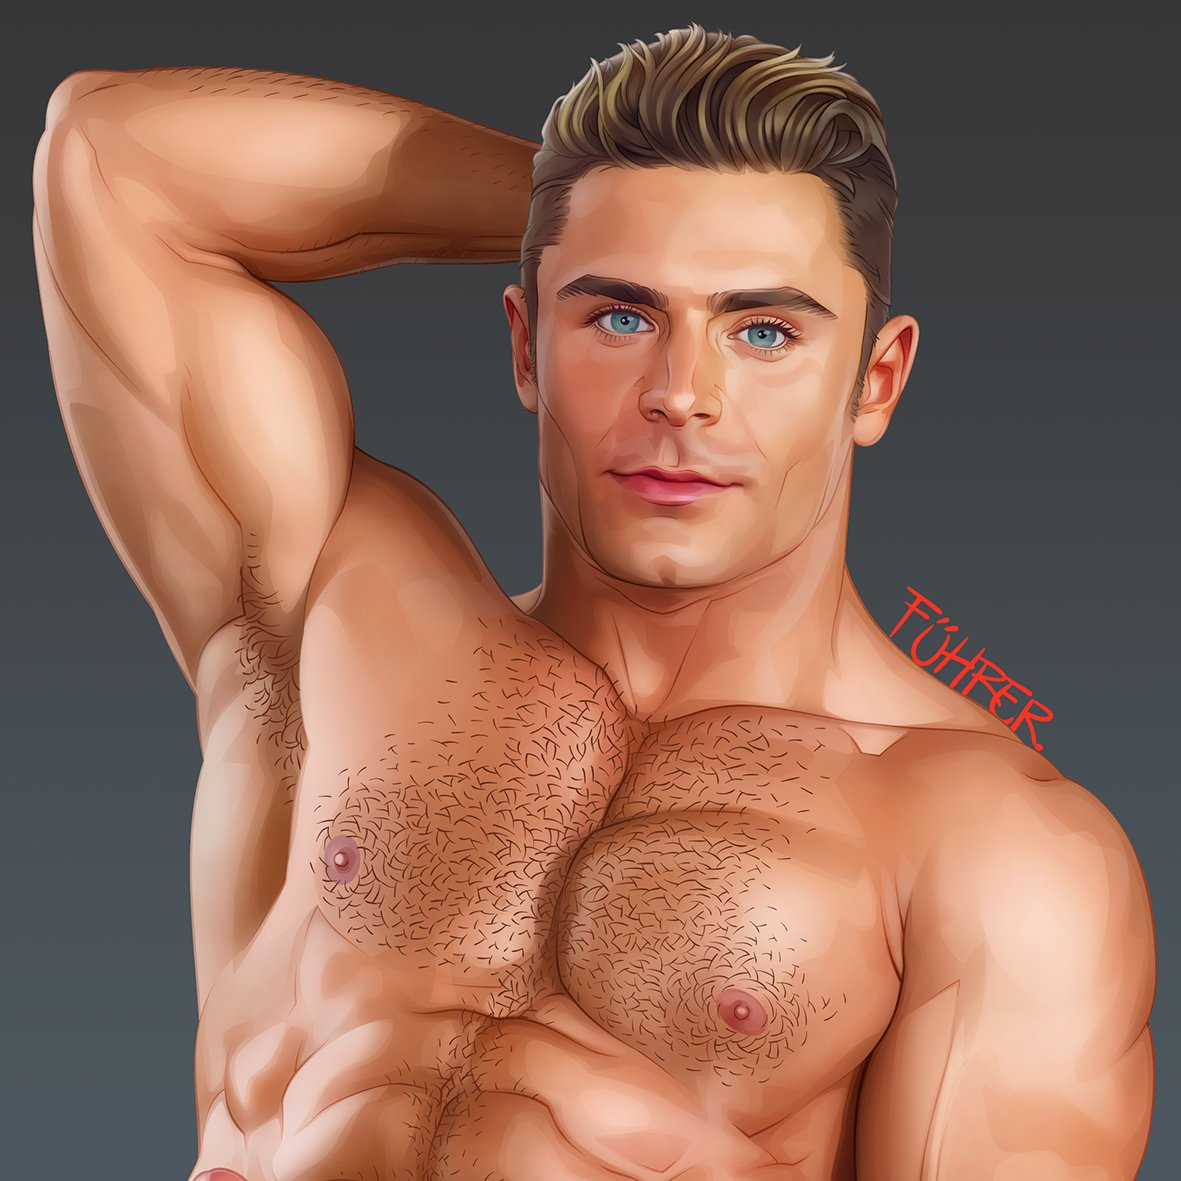 Matt Brody commission, this made me realize how incredibly hot is Zac Efron...